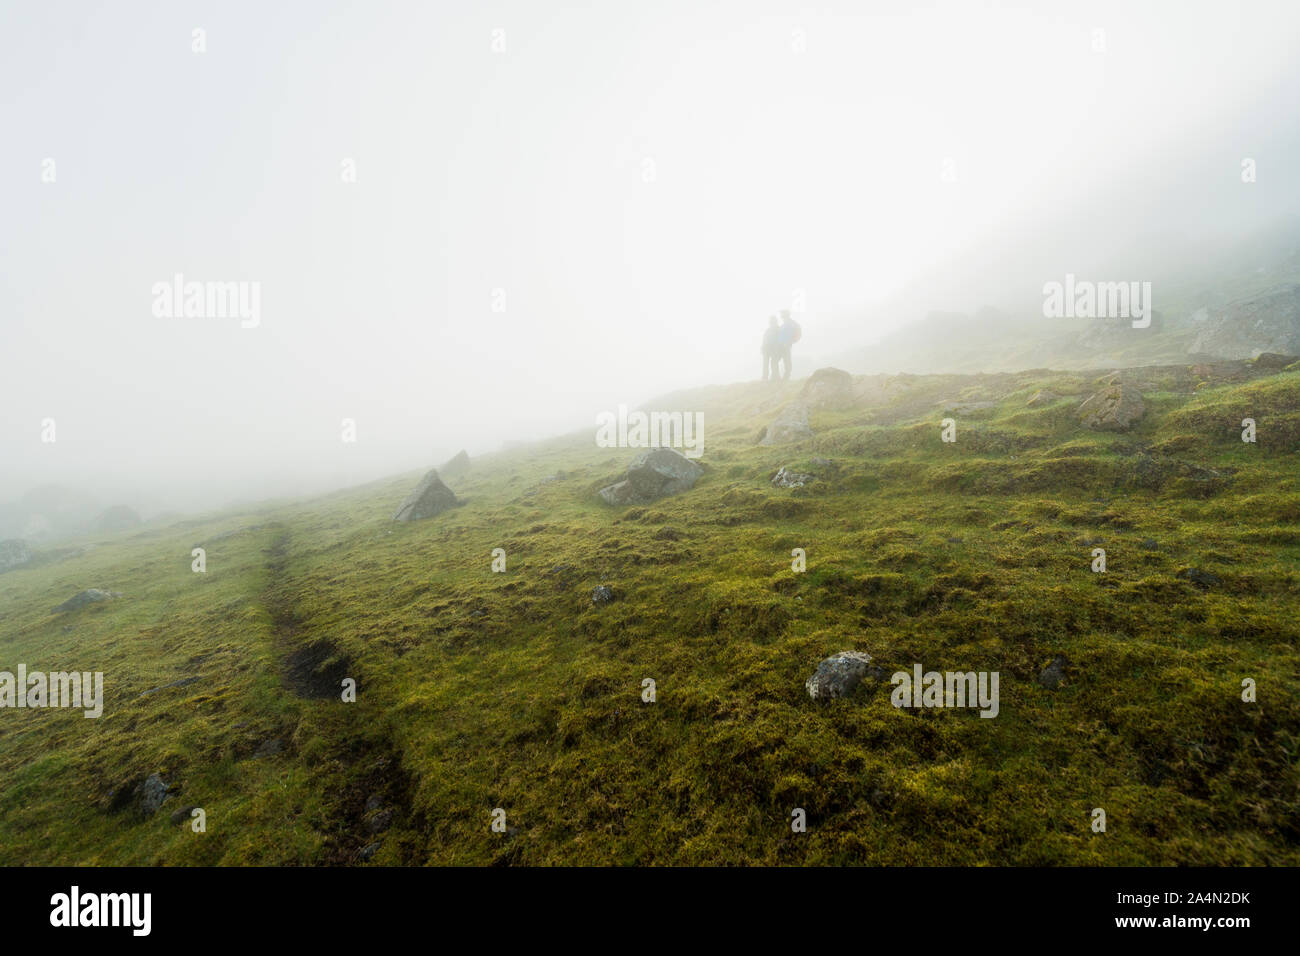 Silhouettes of hikers in fog Stock Photo